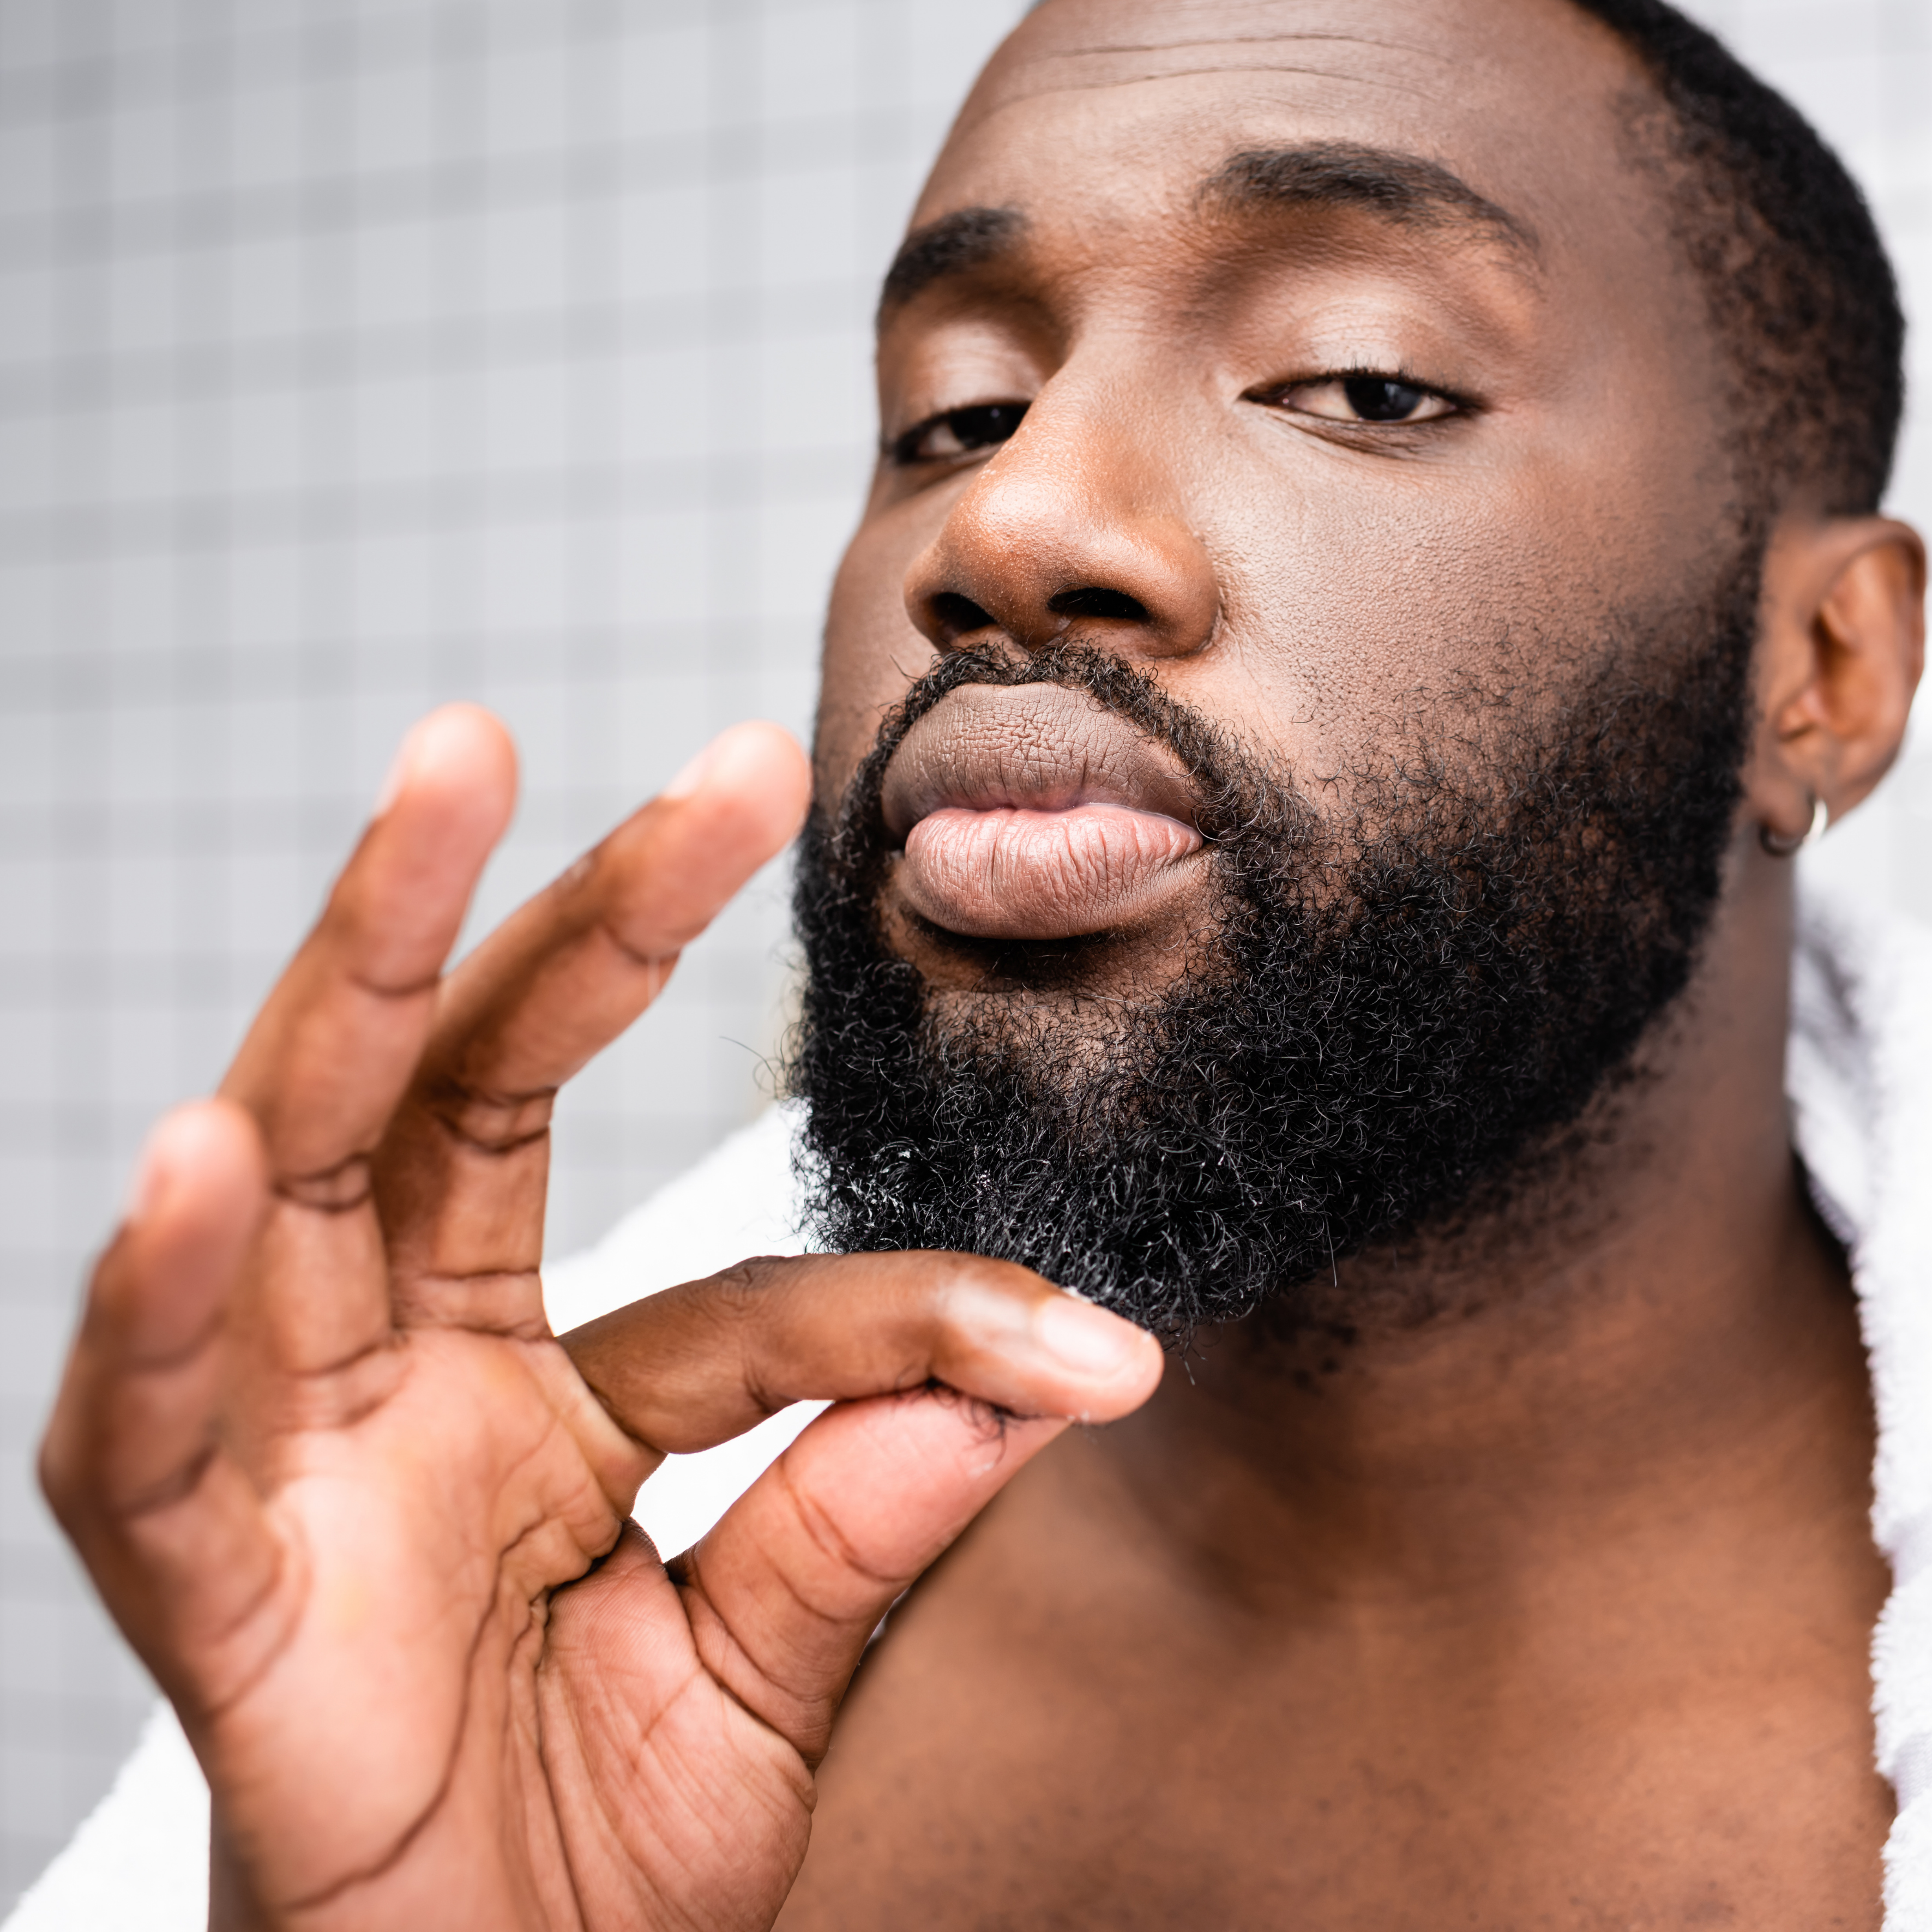 Understanding the stages of beard growth